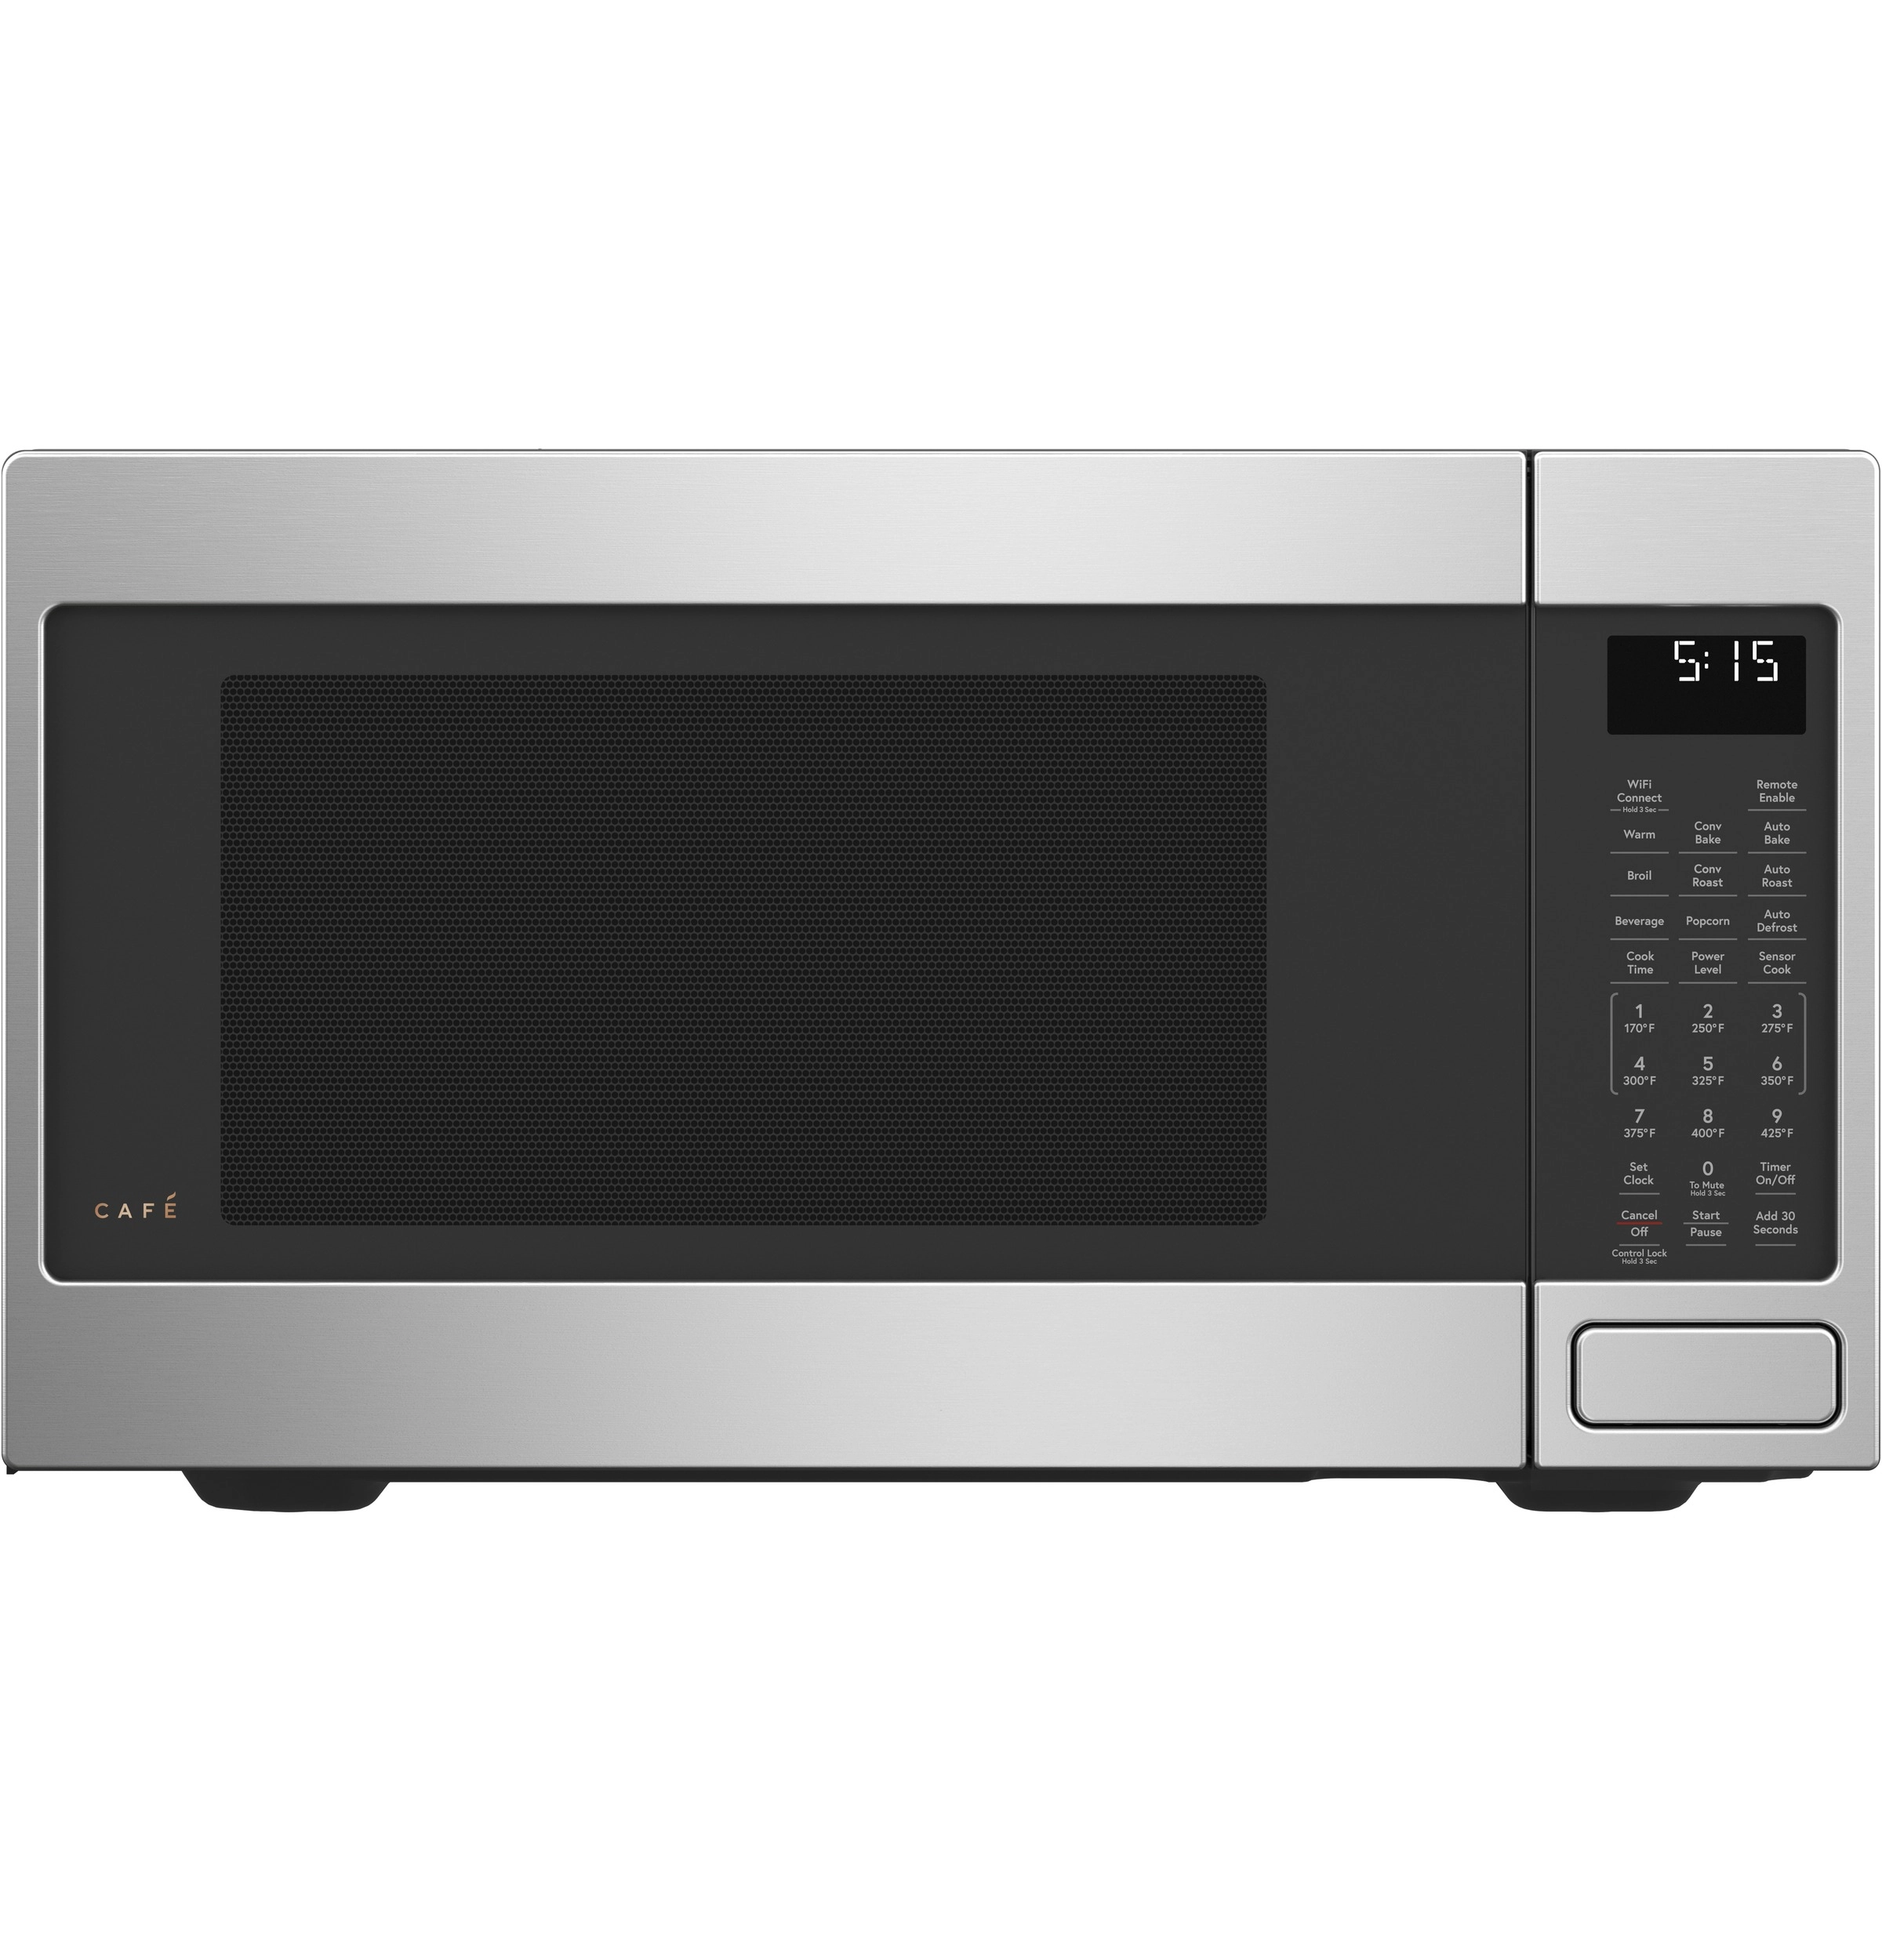 CAFE 22 Inch Built-In Countertop Microwave with Convection